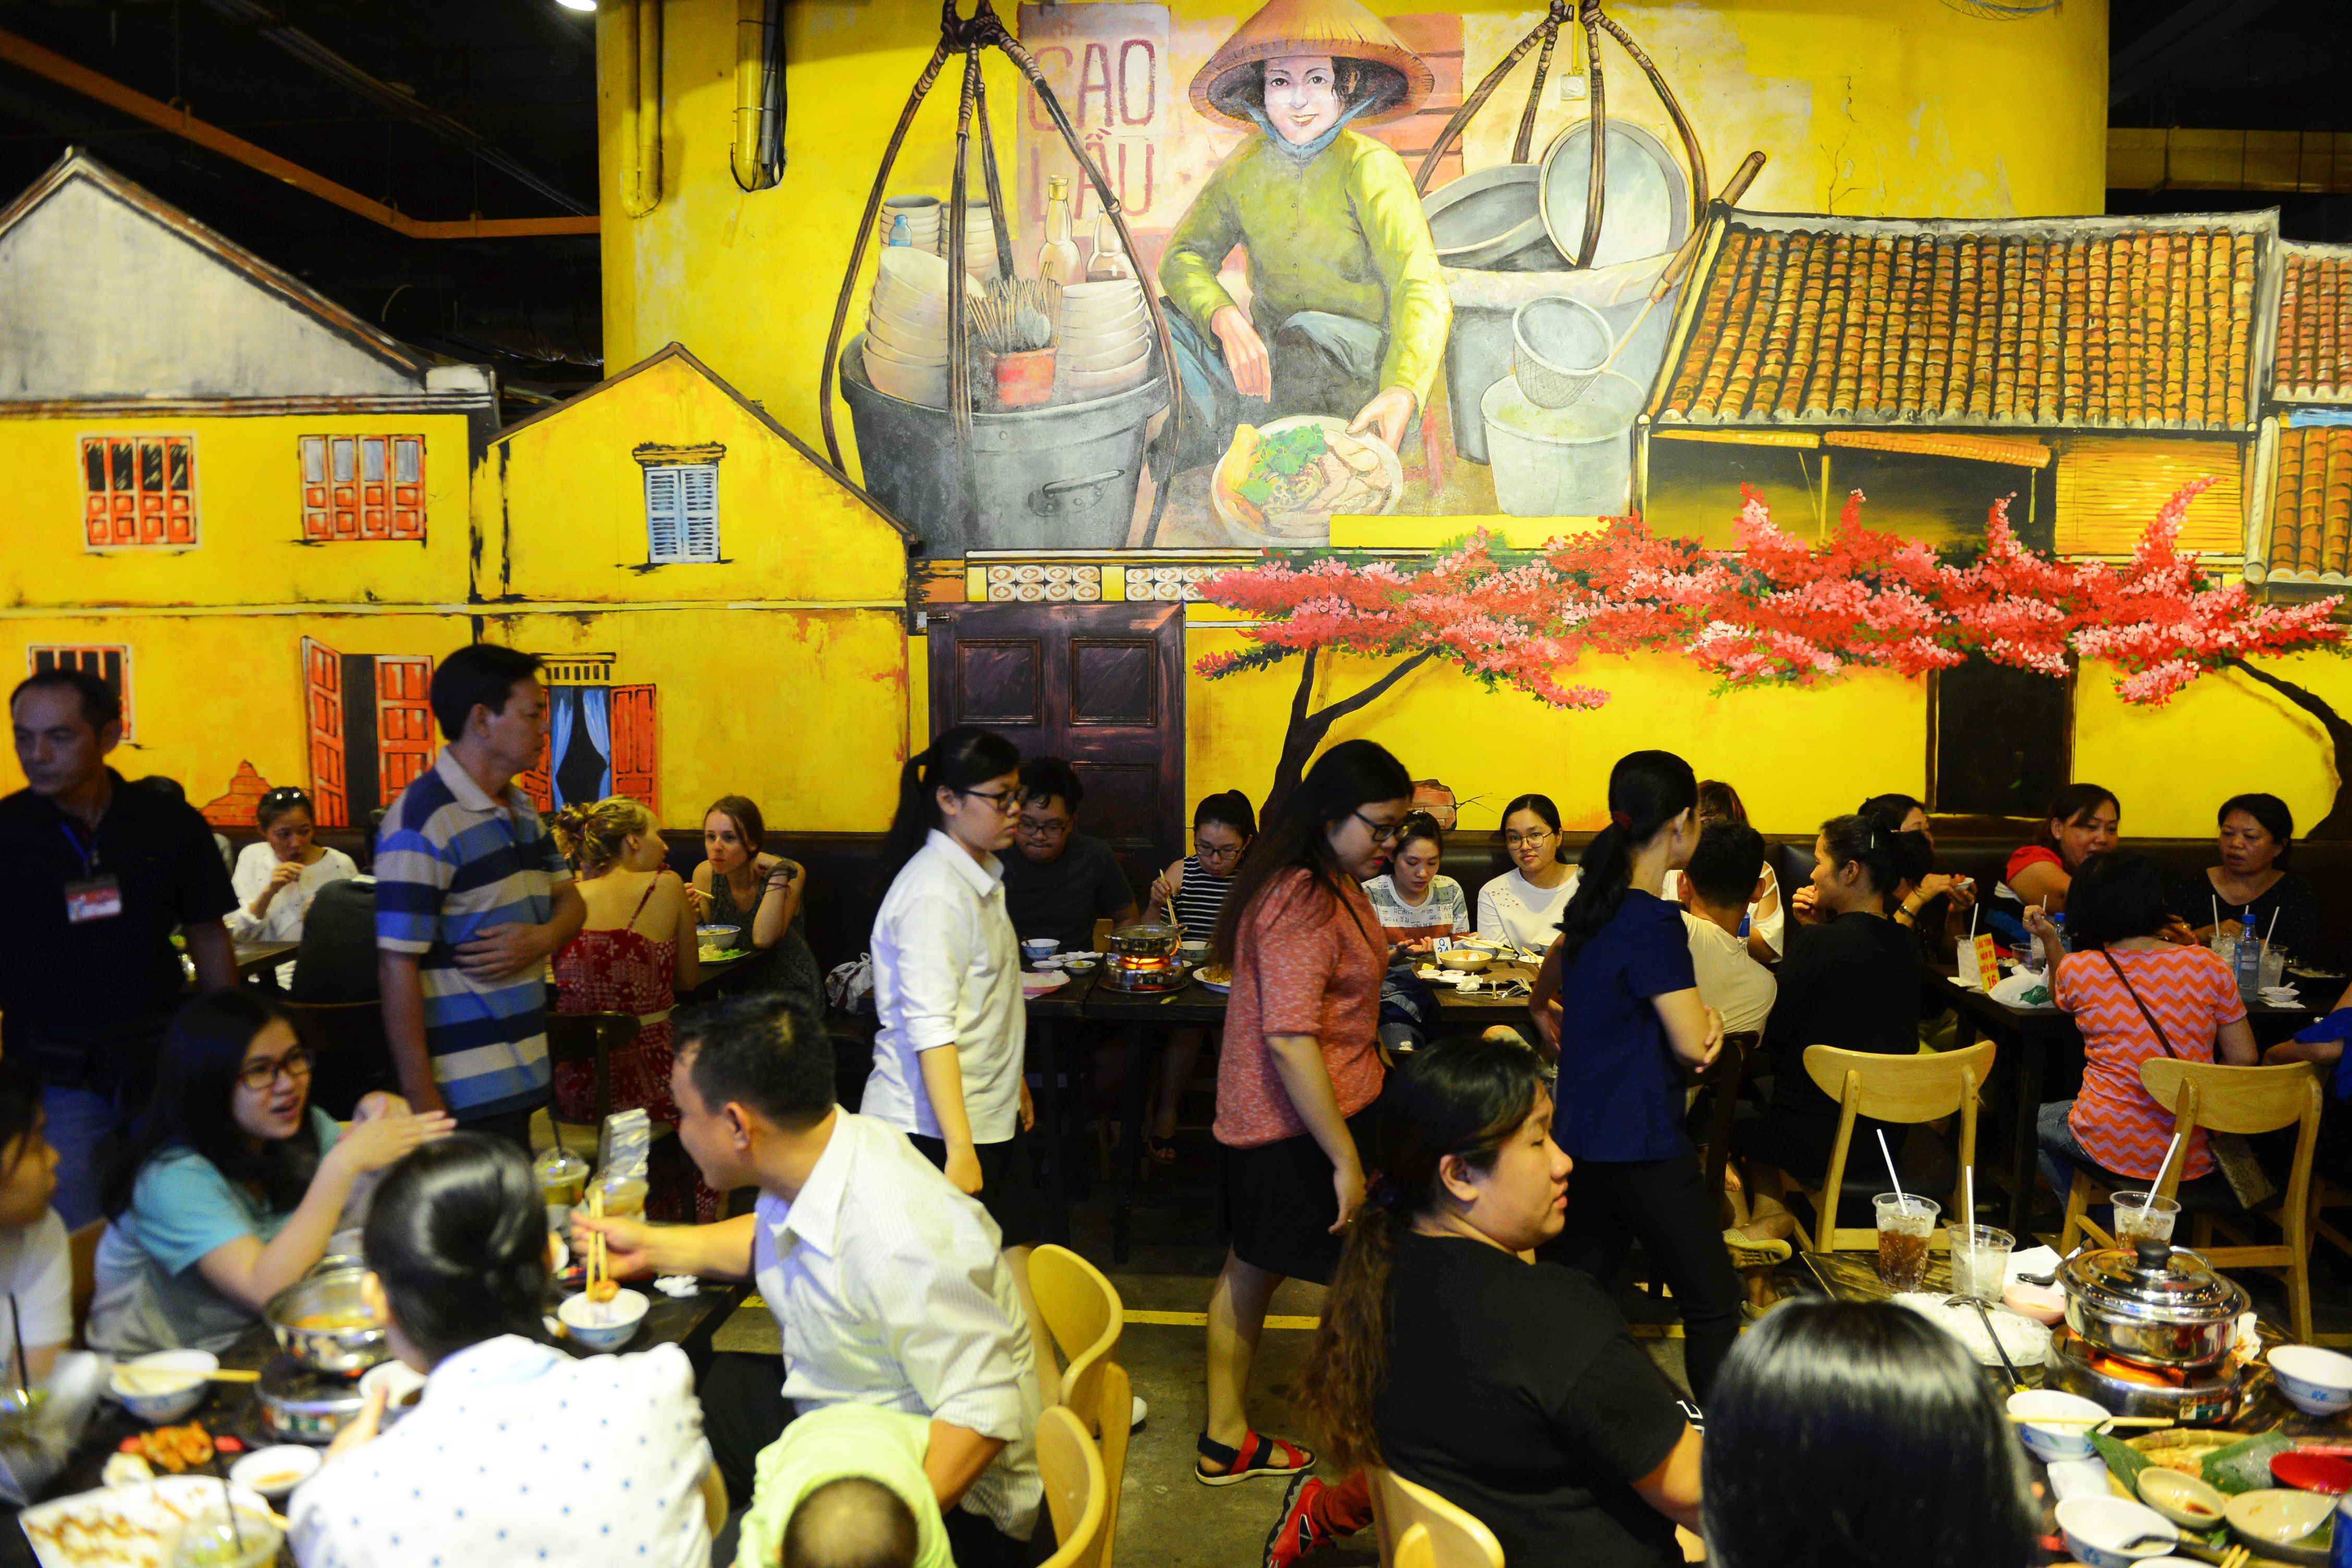 The venue is decorated with paintings highlighting traditional Vietnamese culture and cuisine.